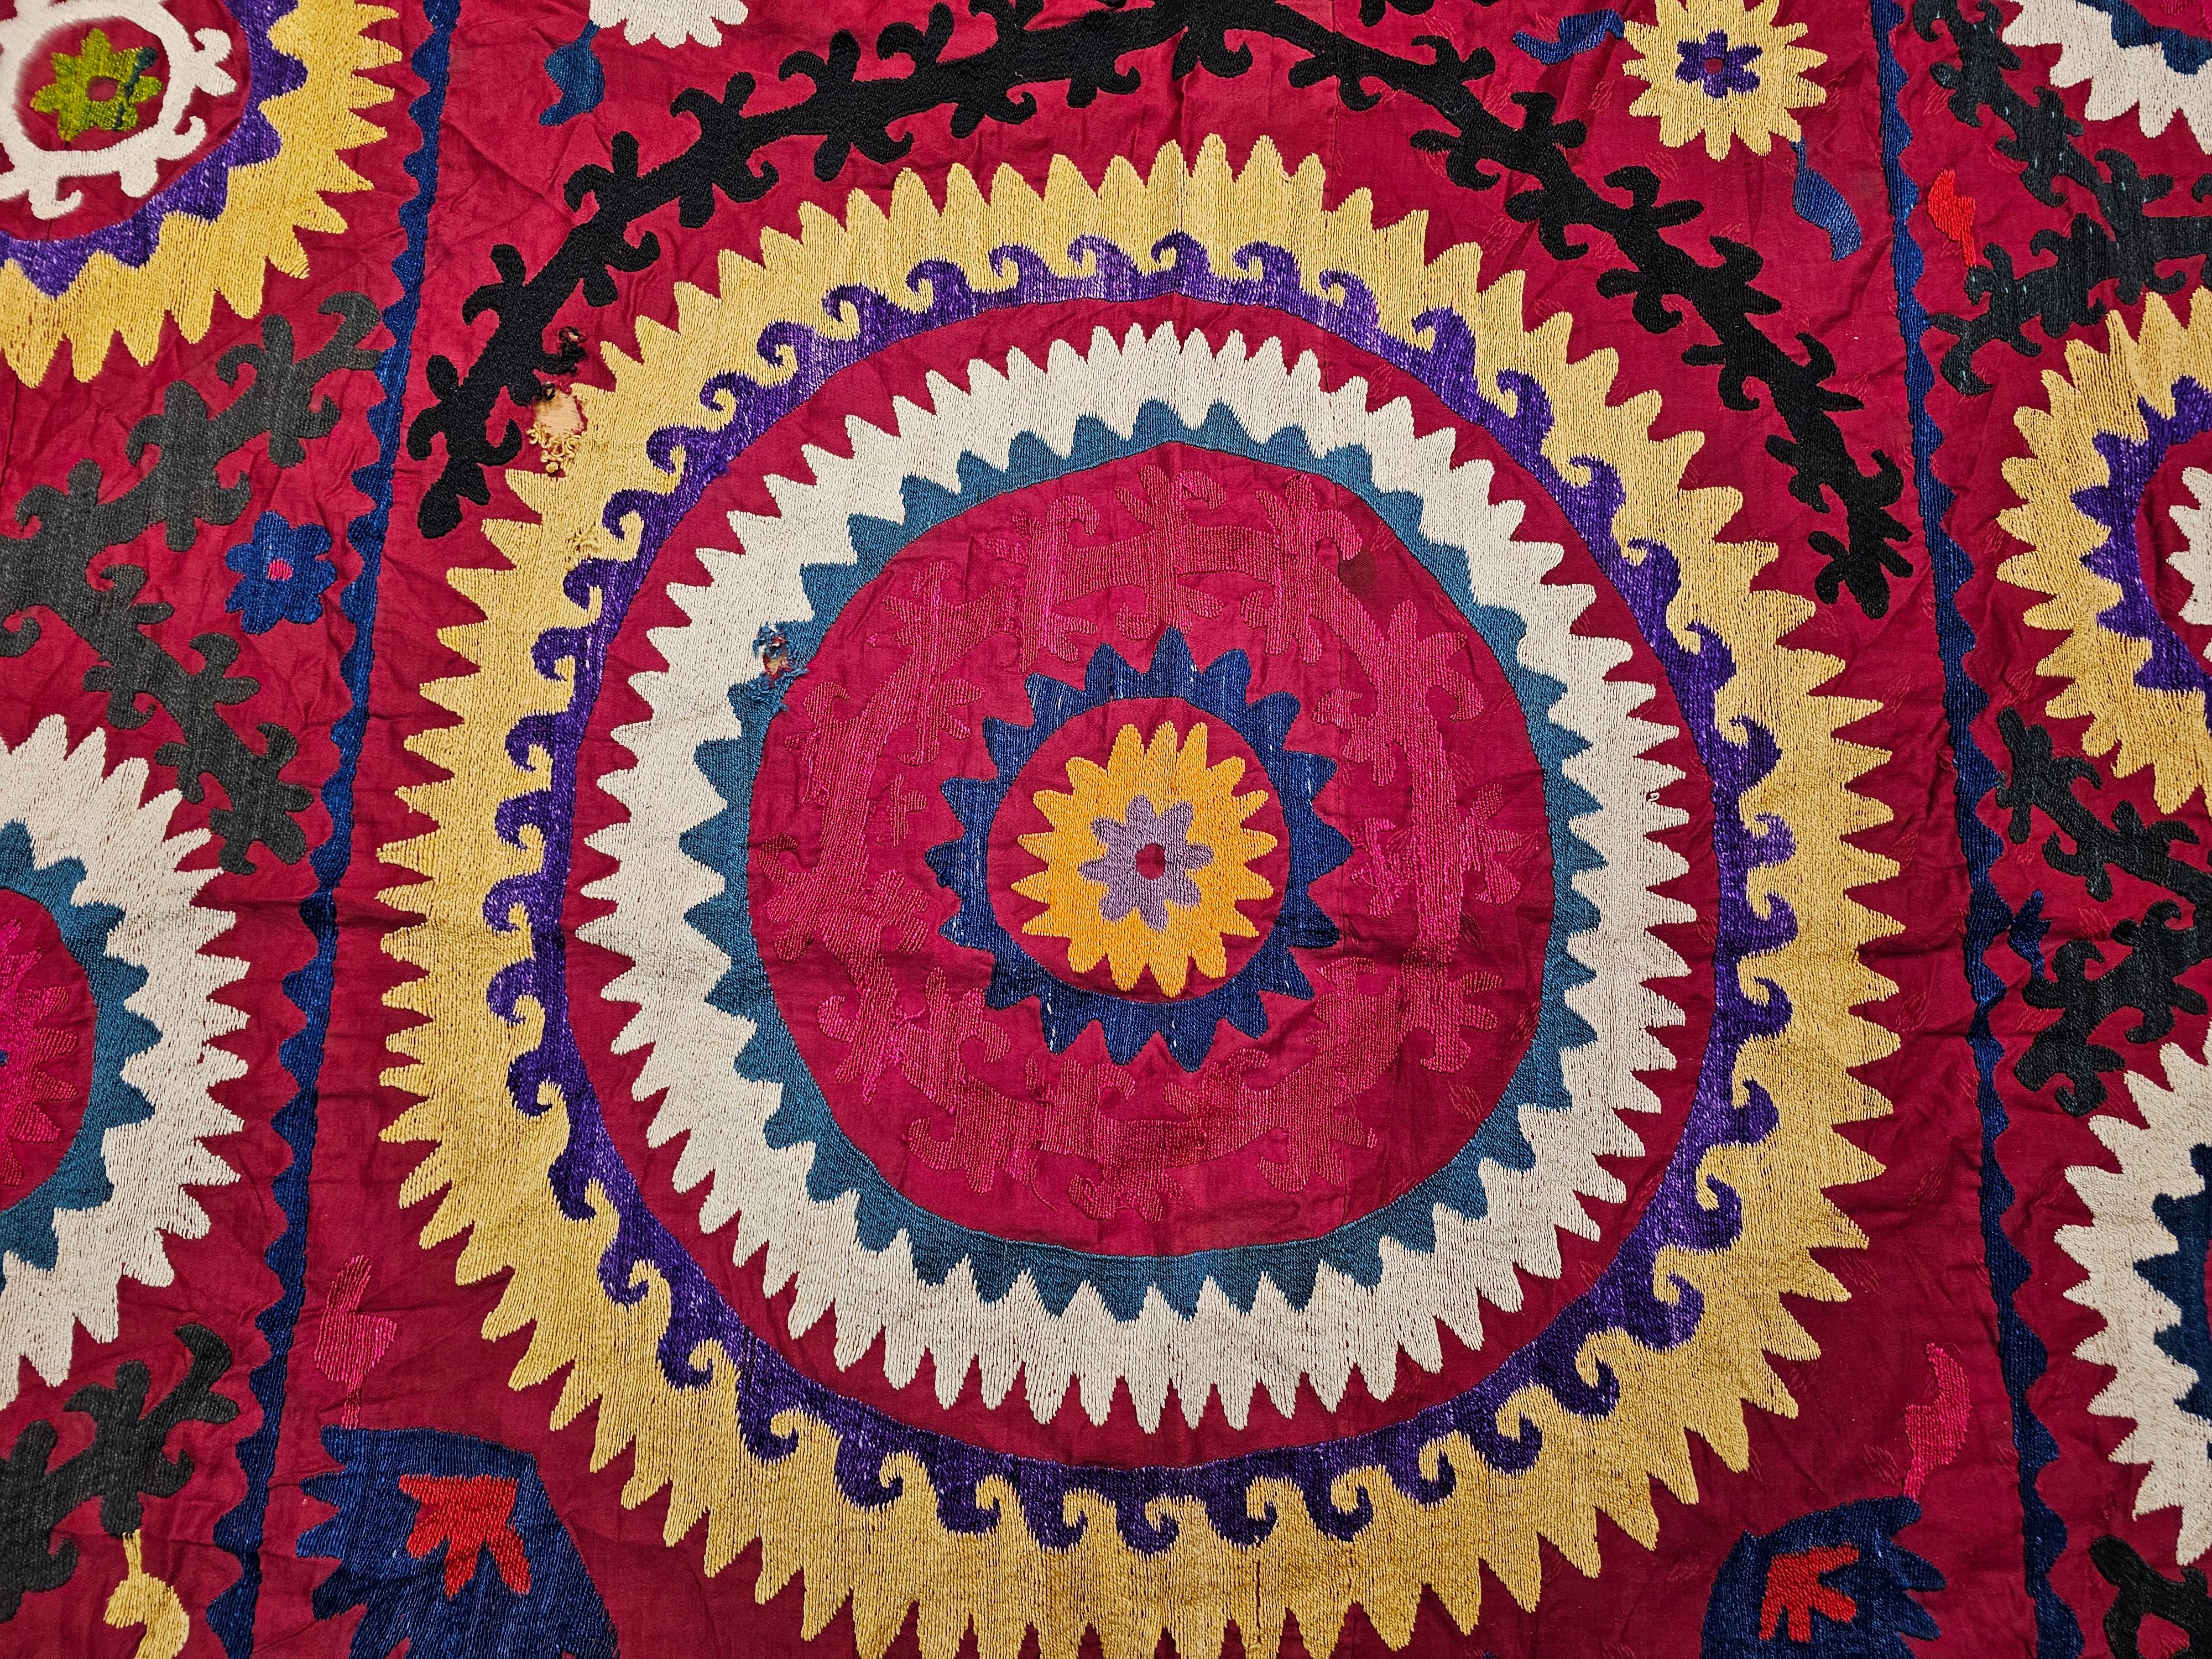 Vintage Uzbek Suzani Silk Embroidery in Crimson Red, Ivory, Blue, Yellow, Black For Sale 1